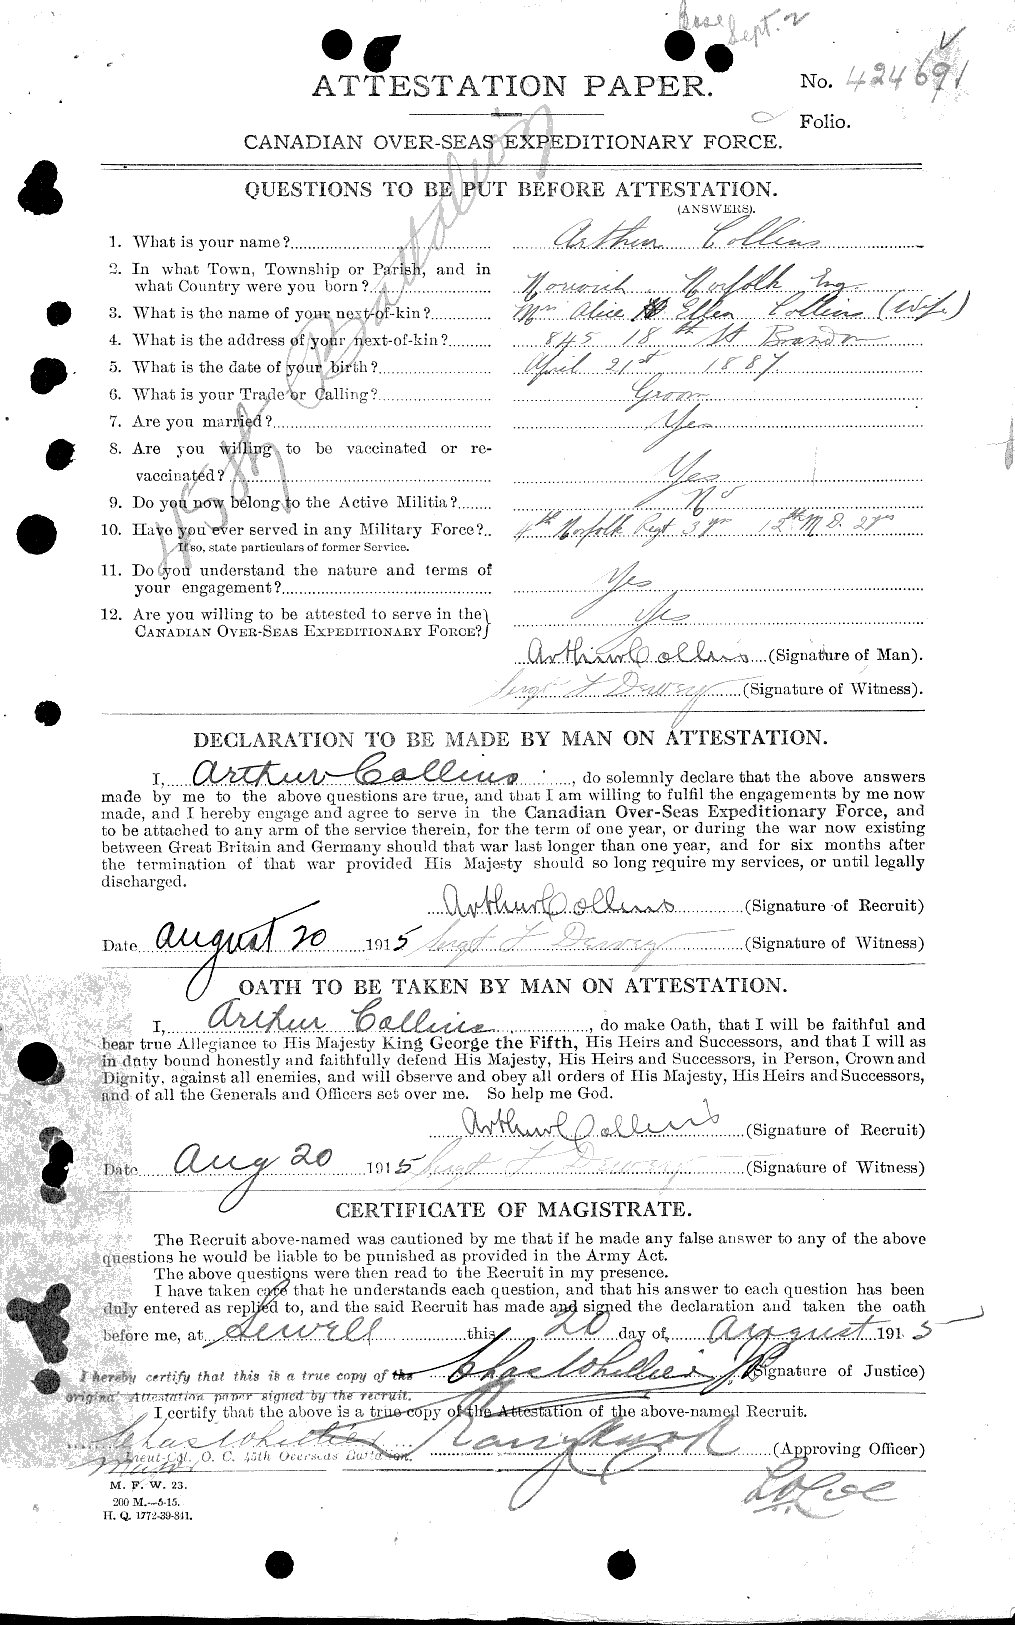 Personnel Records of the First World War - CEF 028980a